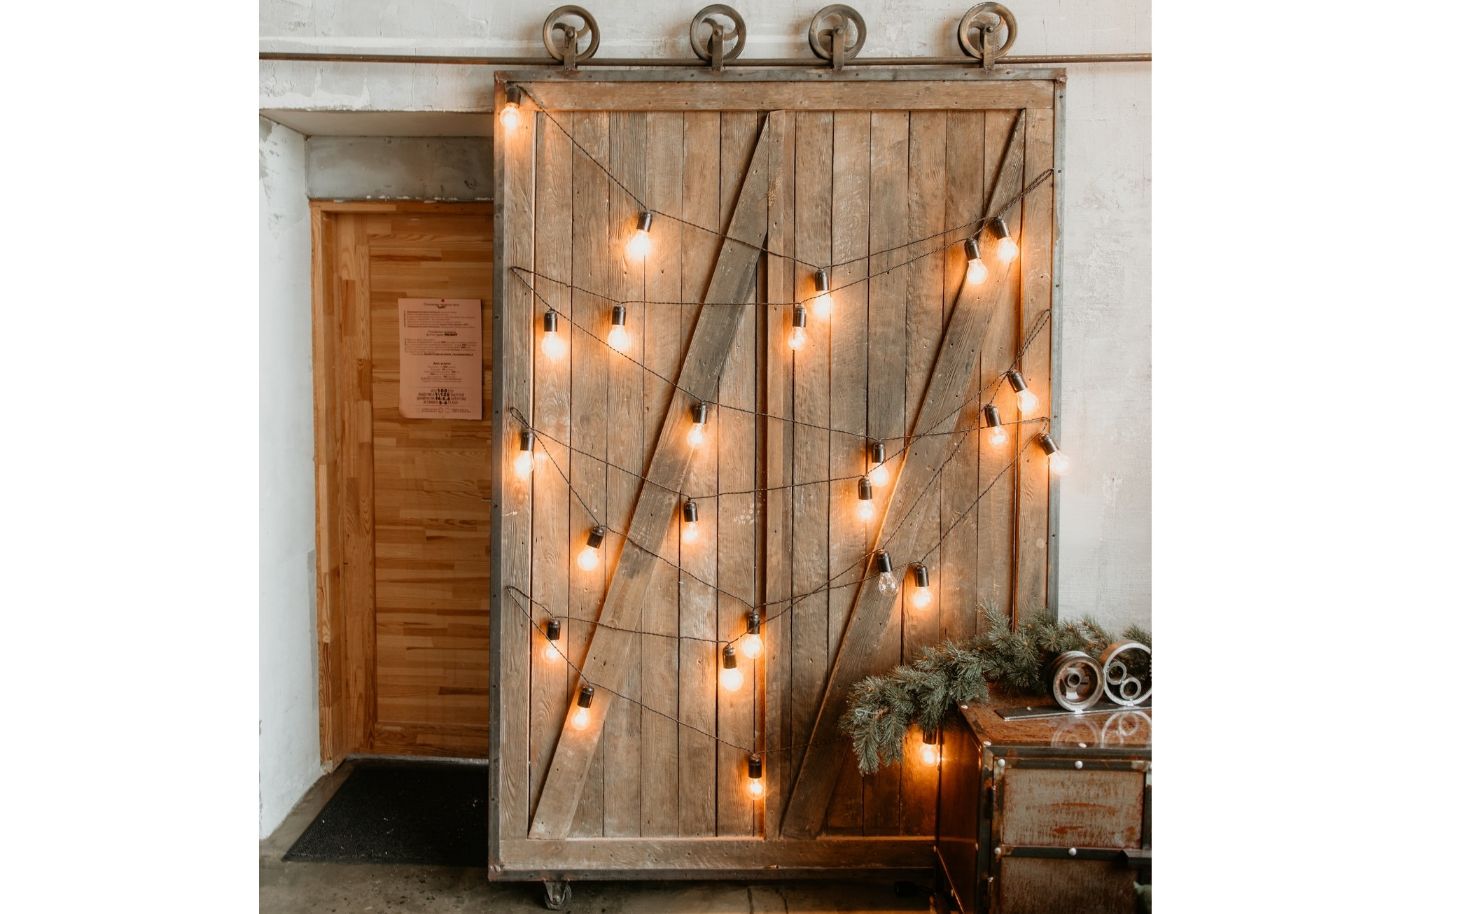 18 DIY Decor Pieces for a Lovely, Rustic Look